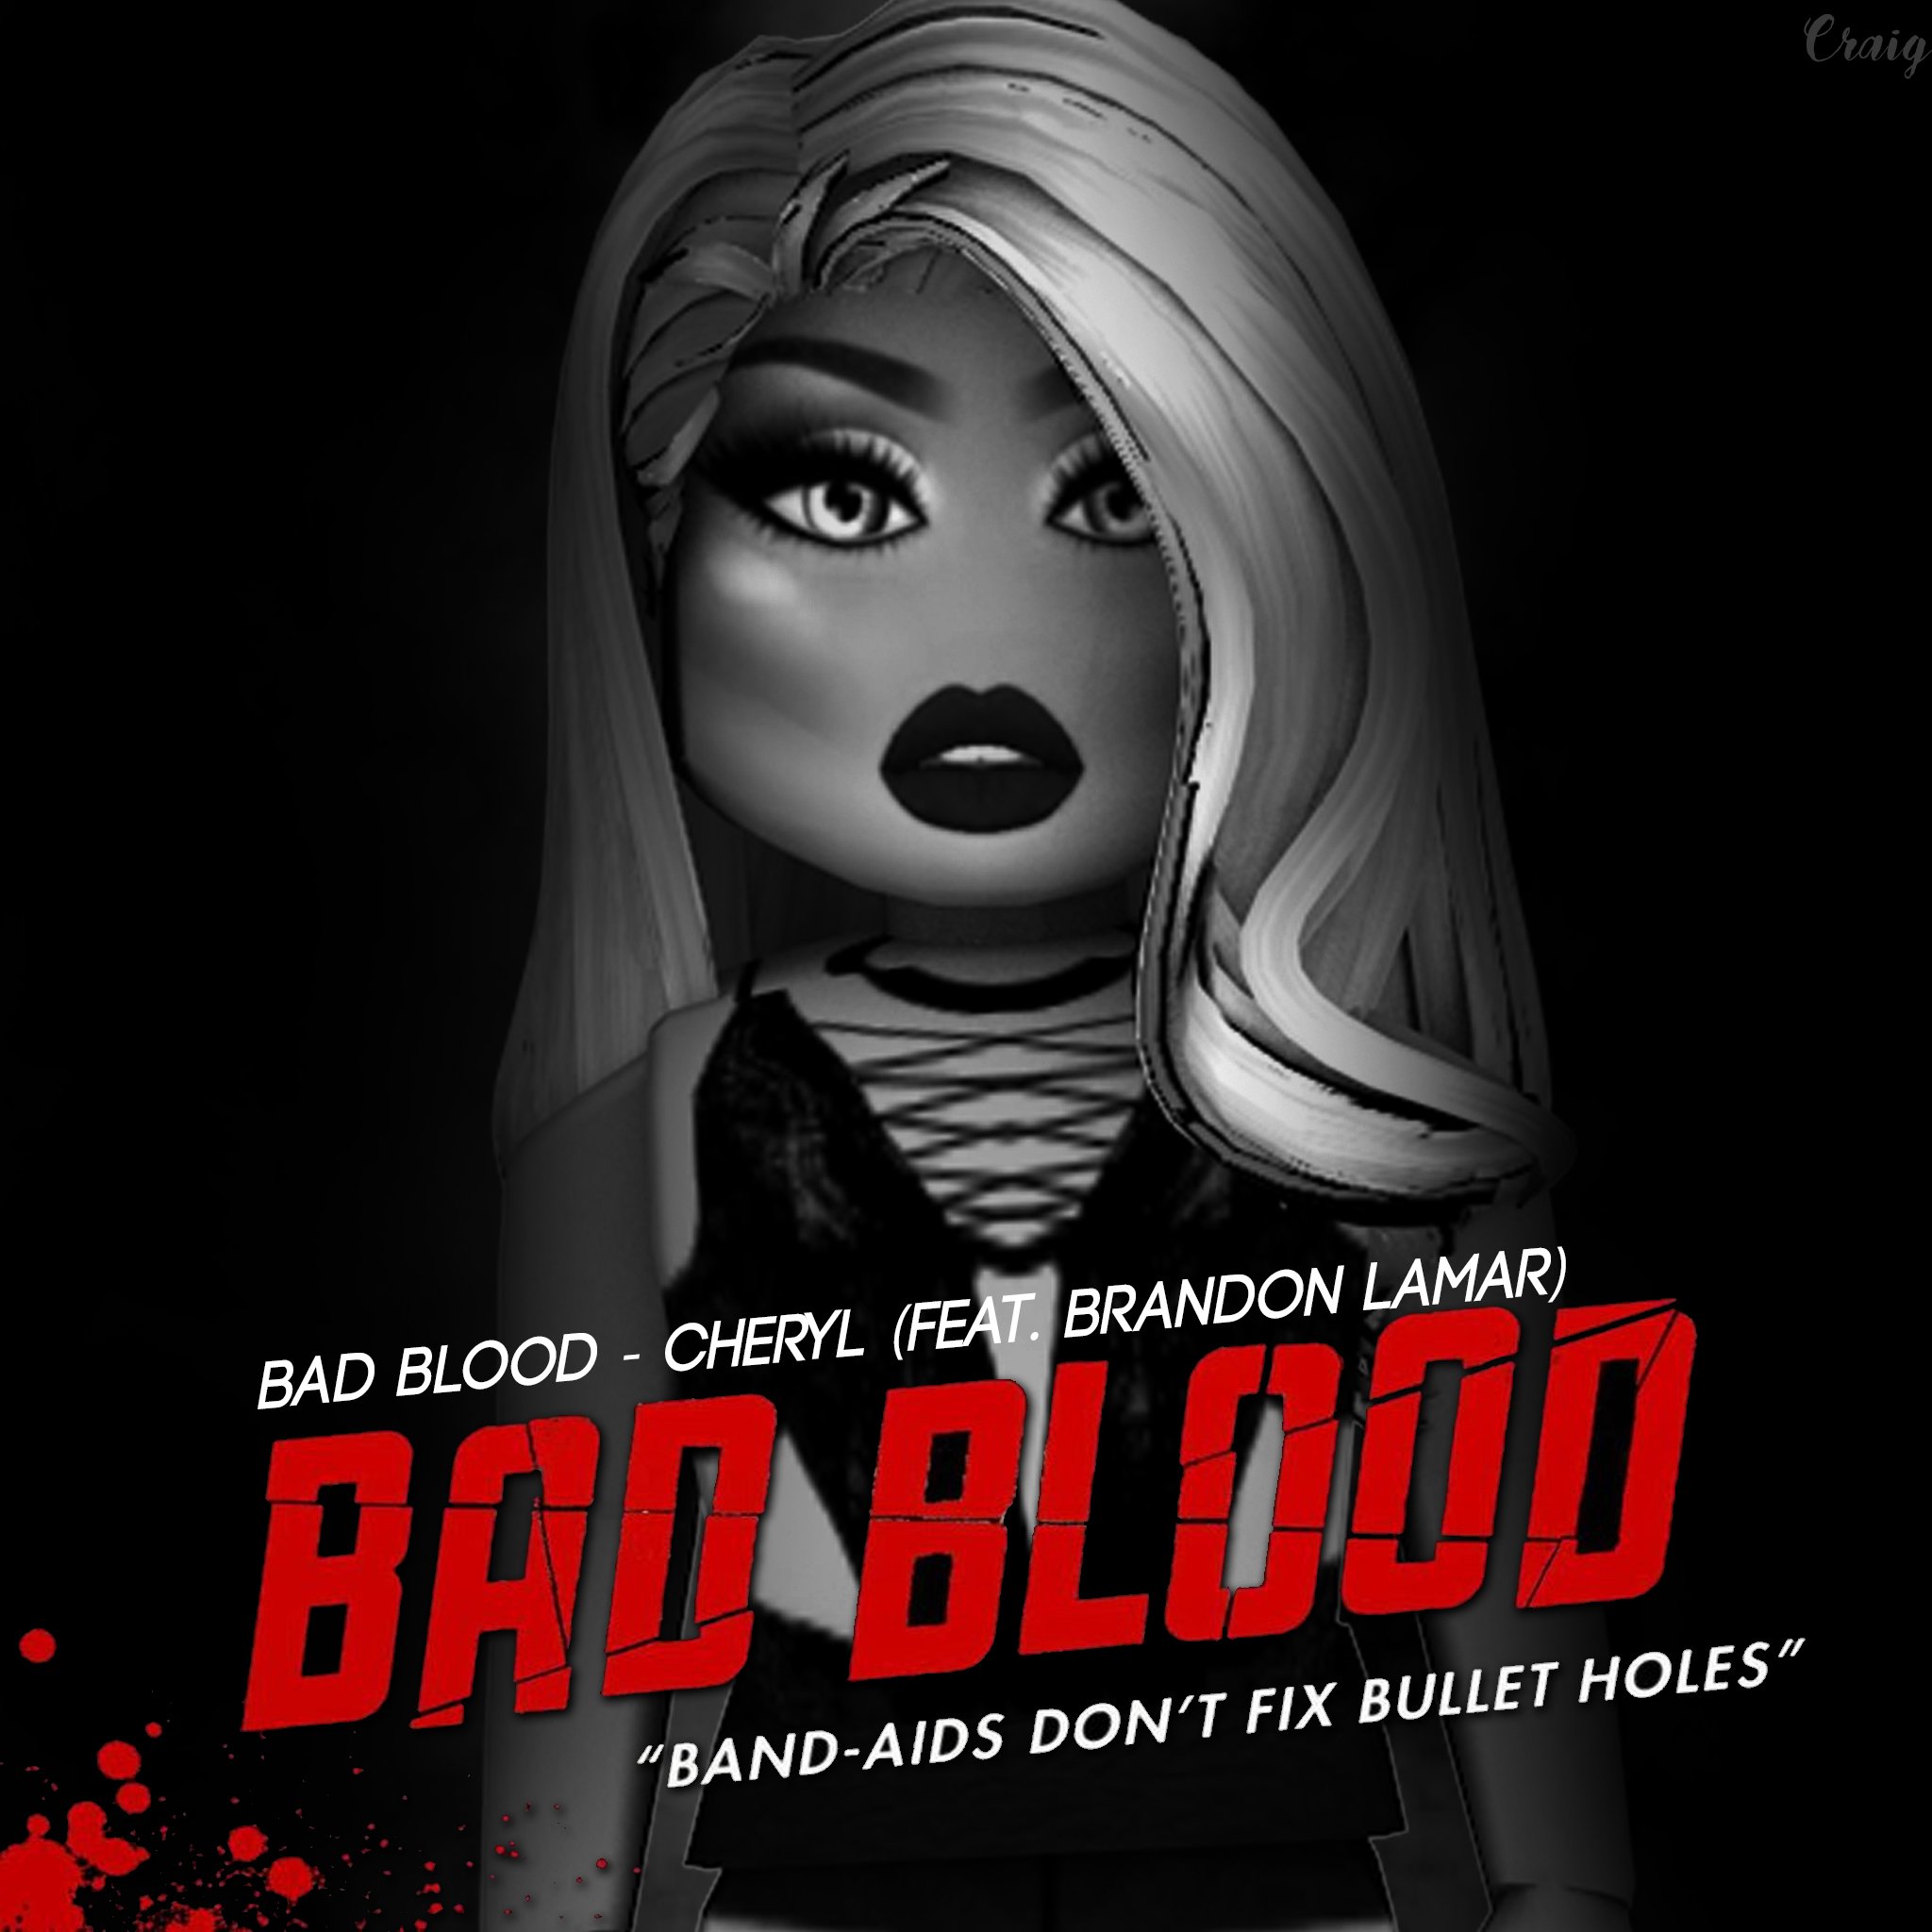 Her Name Was Cheryl Blacklivesmatter On Twitter New Music Cheryl Bad Blood Feat Brandon Lamar Released Now On All Platforms Streaming Sites Lead Single Of Cv3 Like - bullet hole with blood roblox